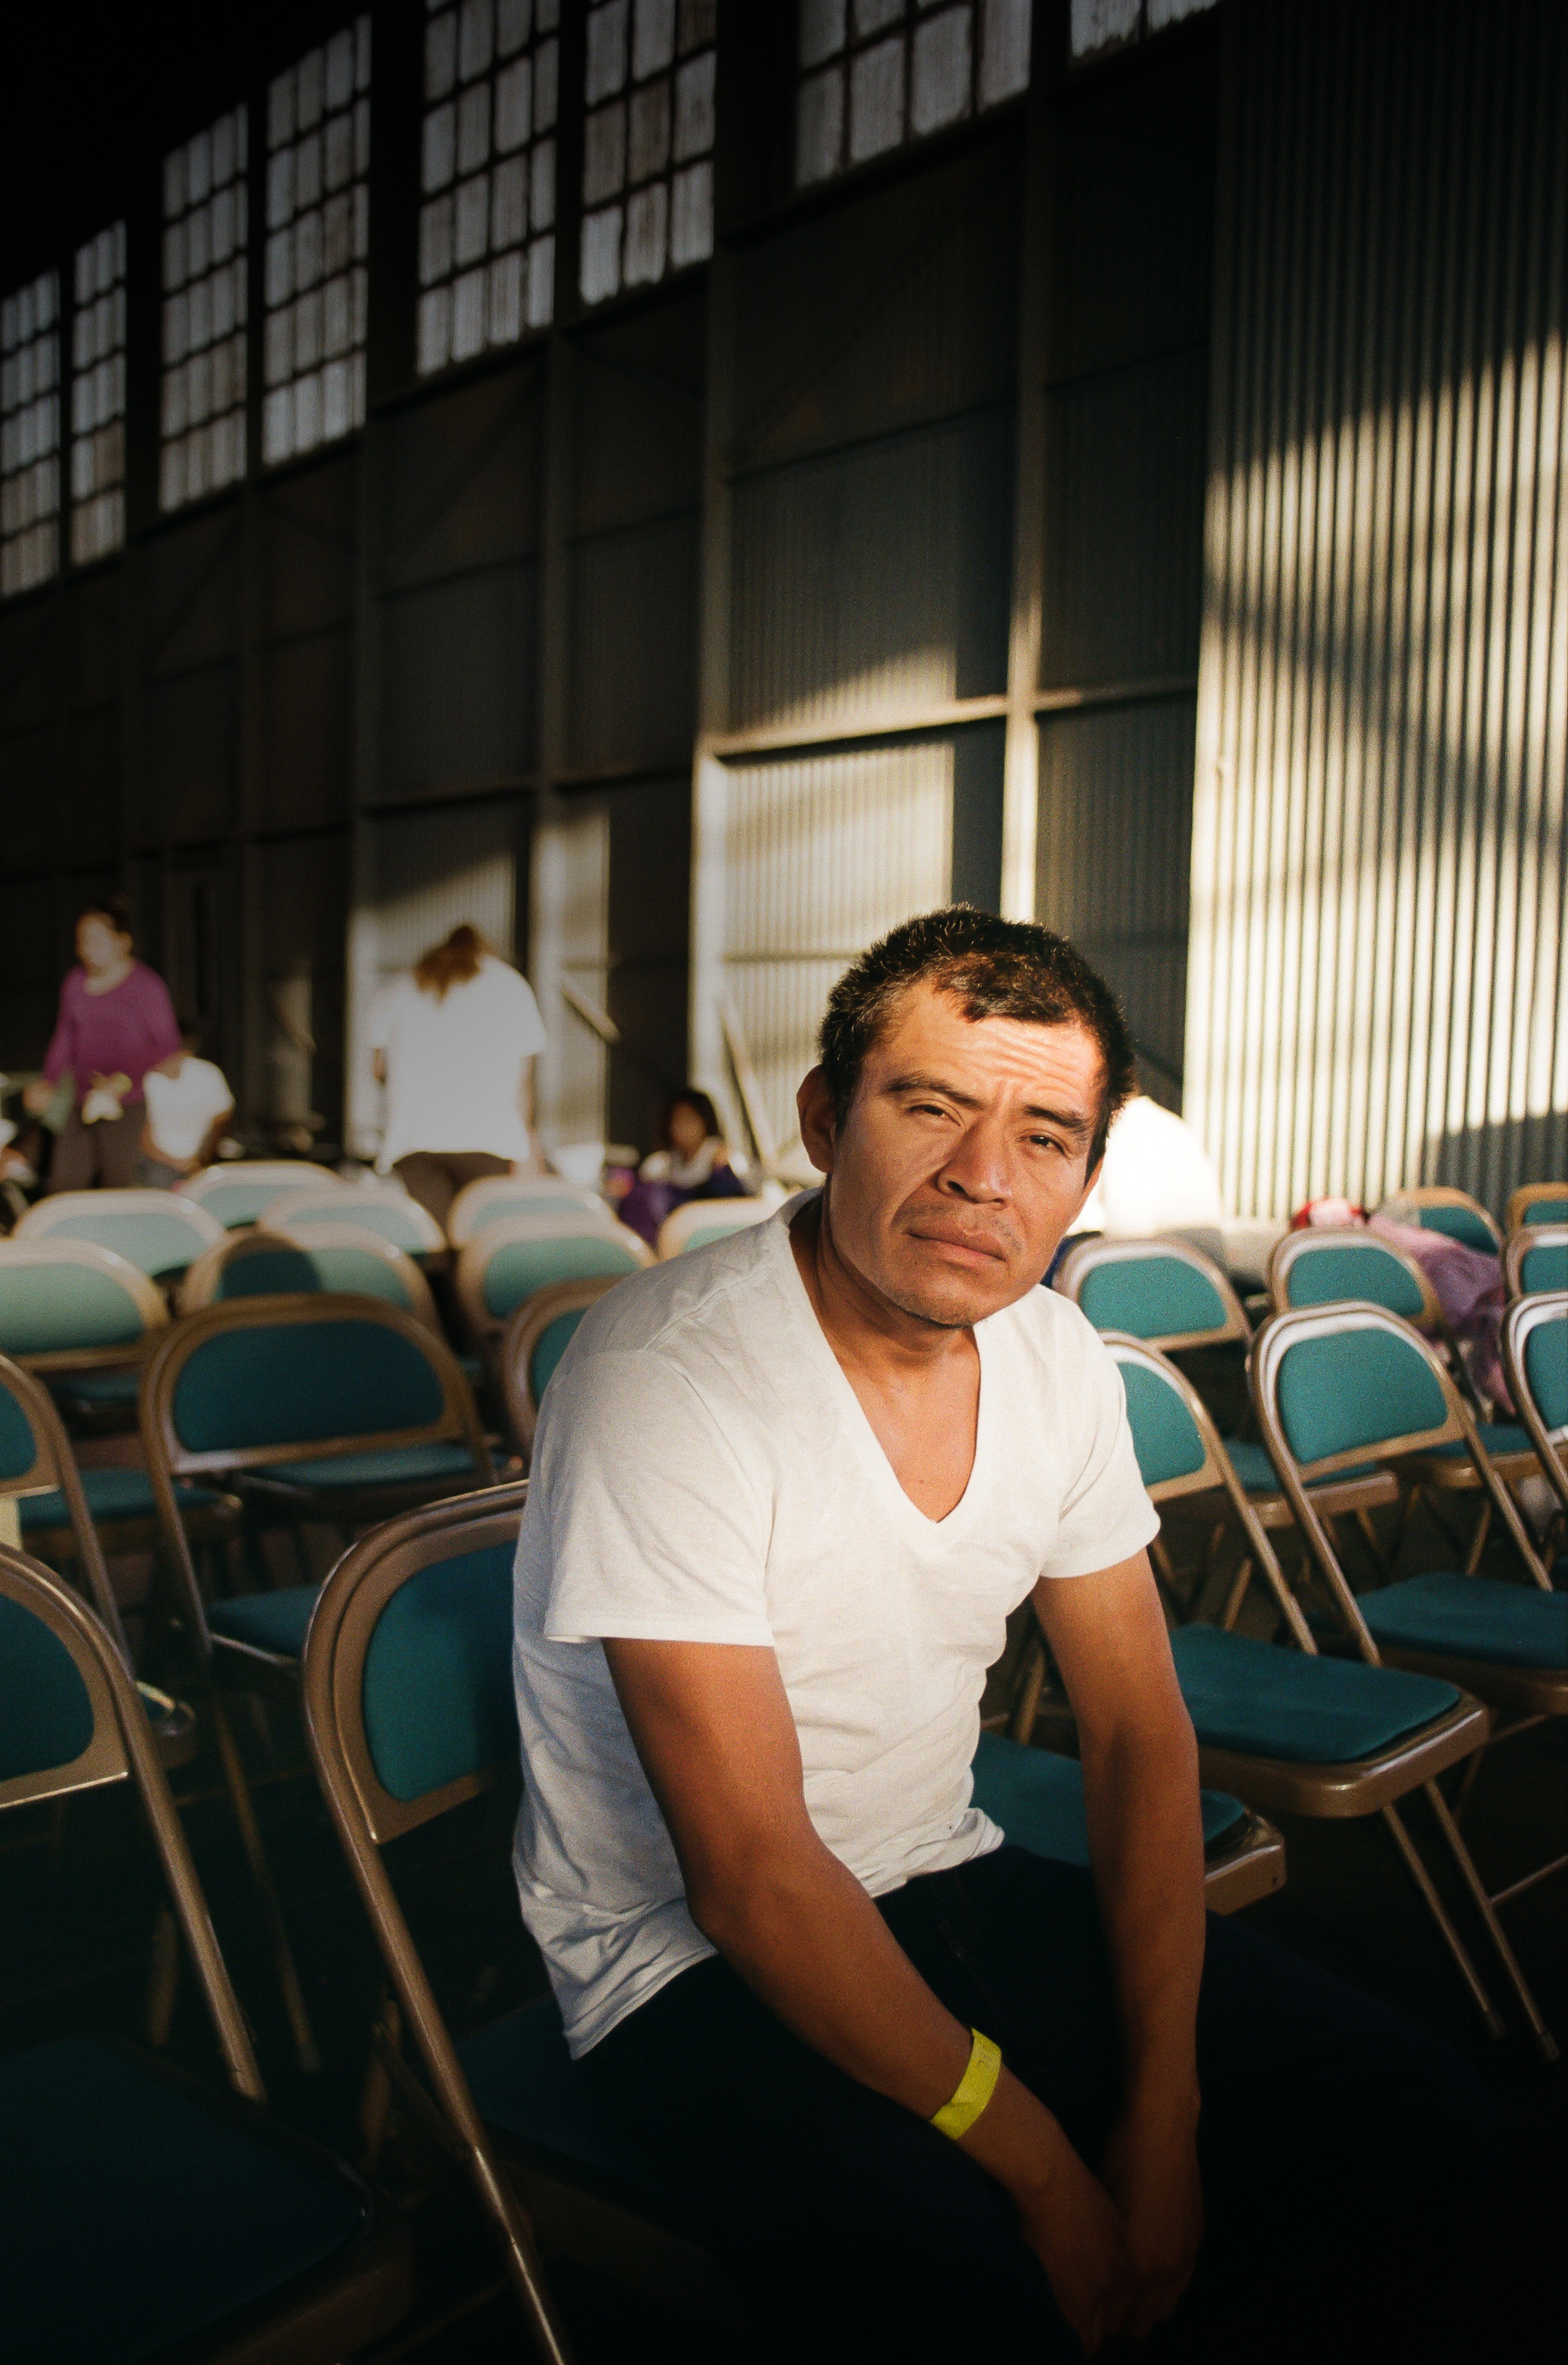 For many like the man above, an asylum seeker's journey does not stop at Deming. This man awaits placement in a host family home in the United States.